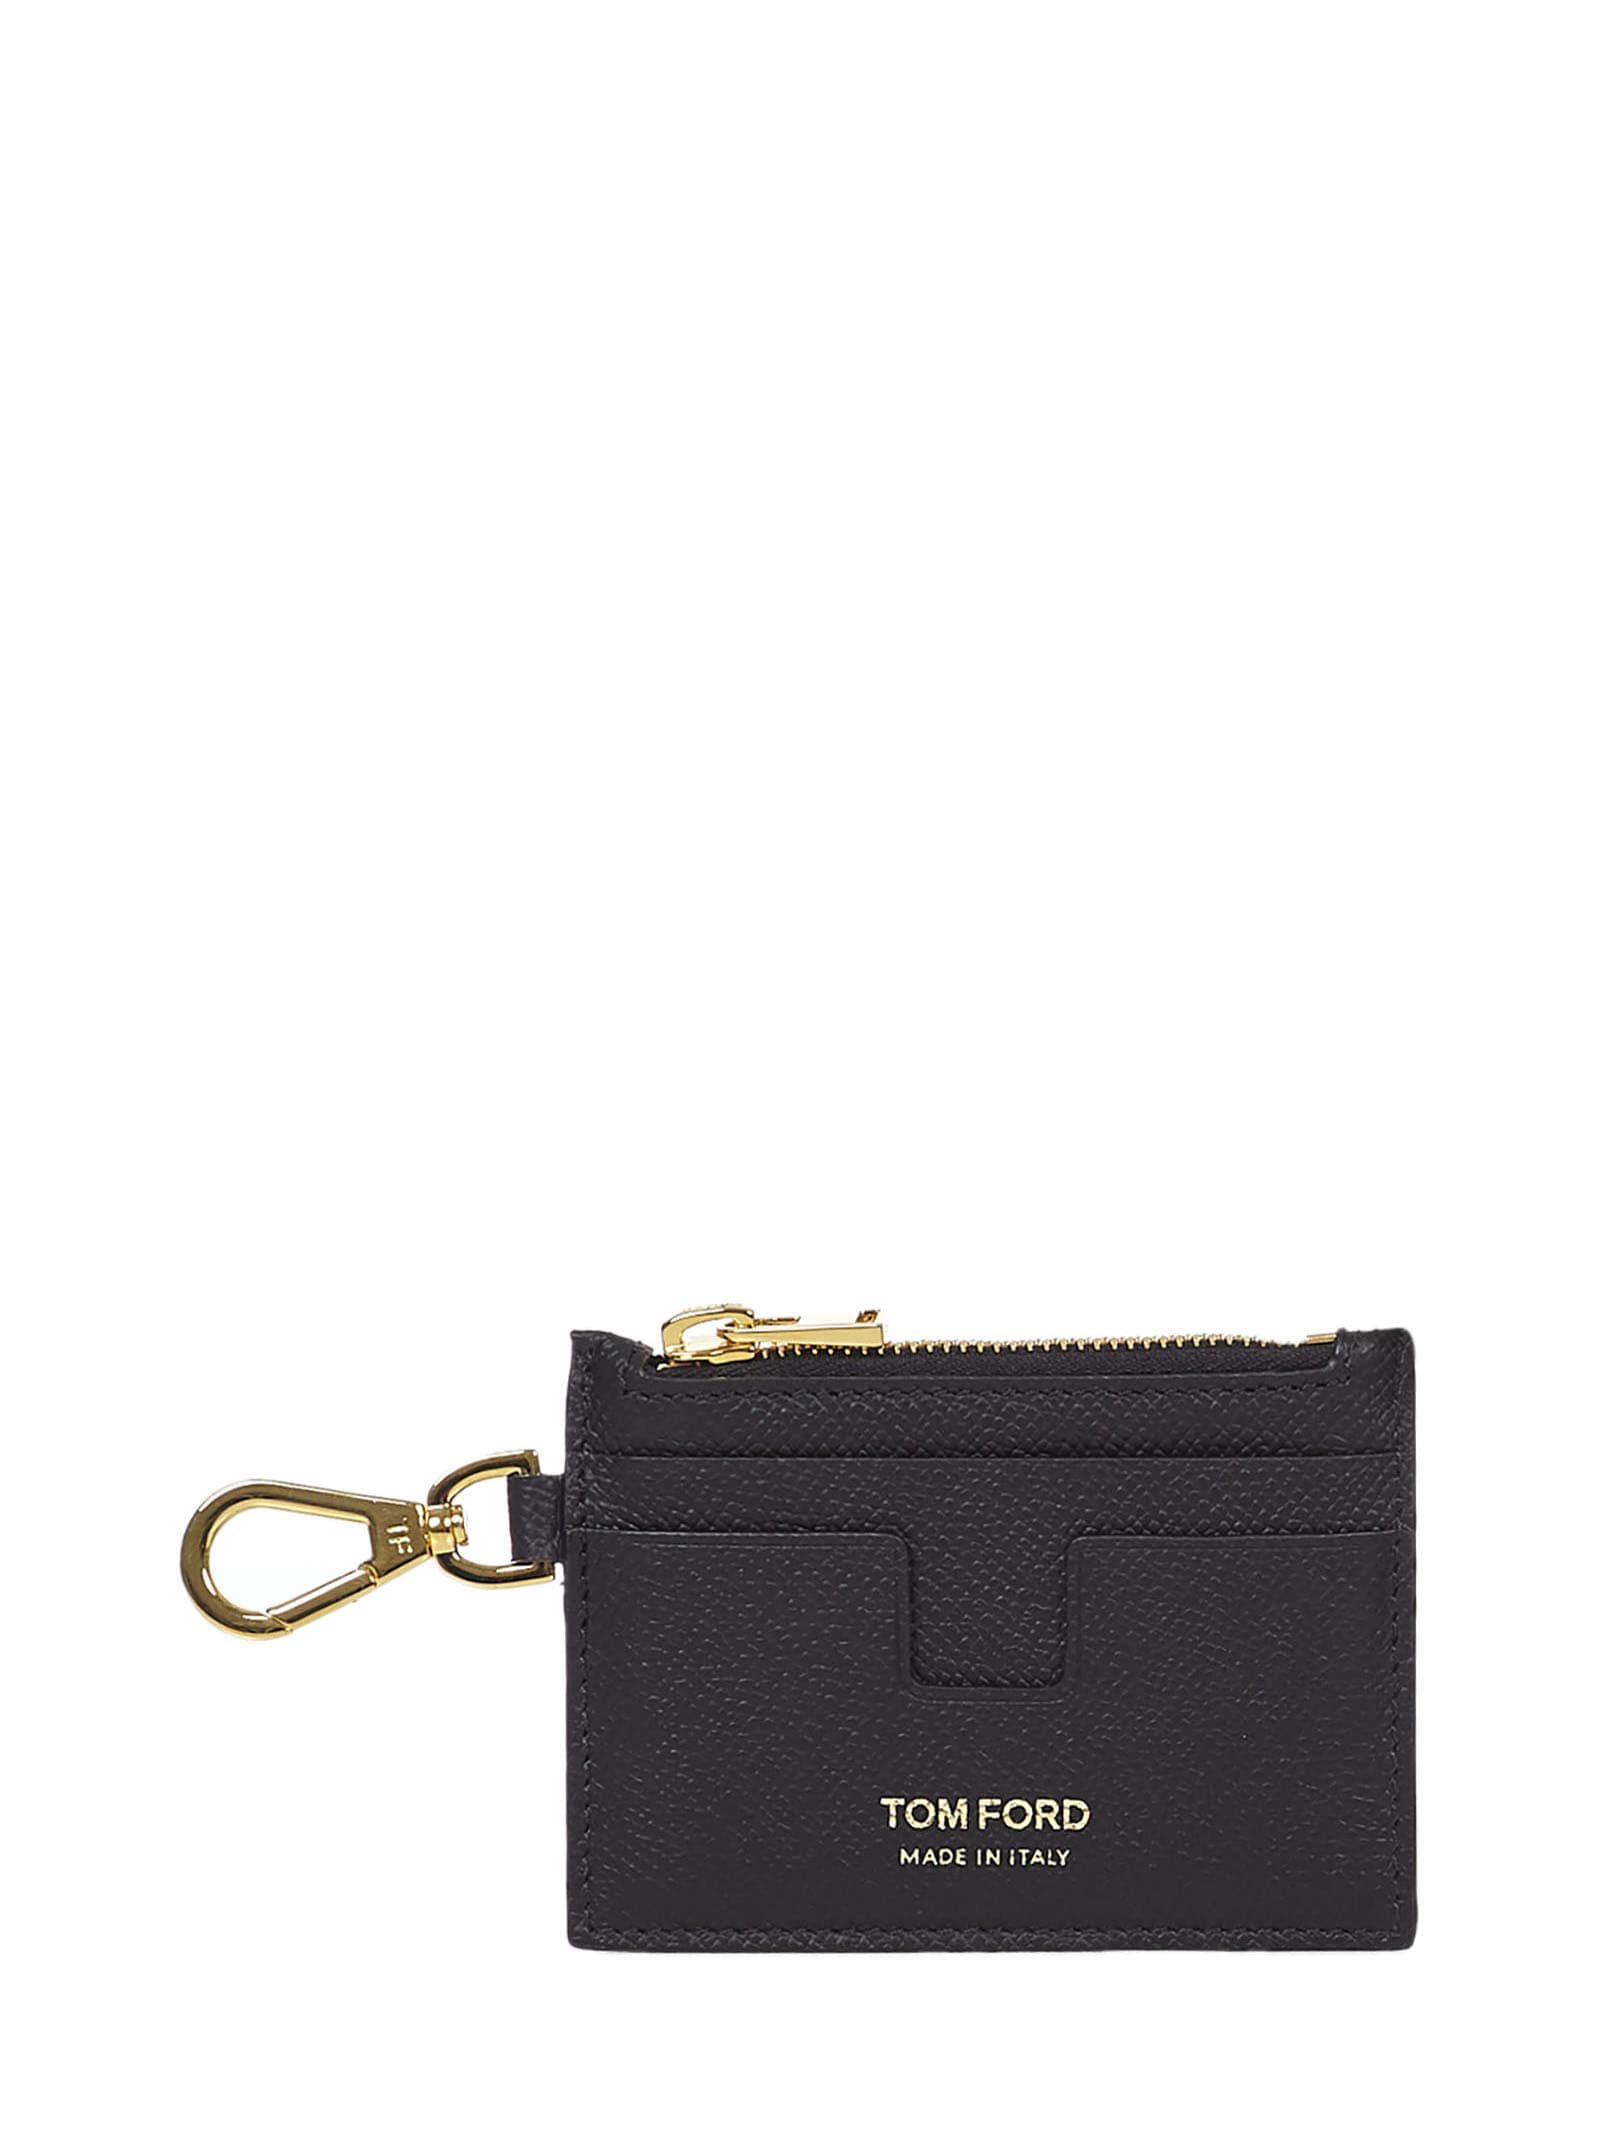 Tom Ford Card Holders